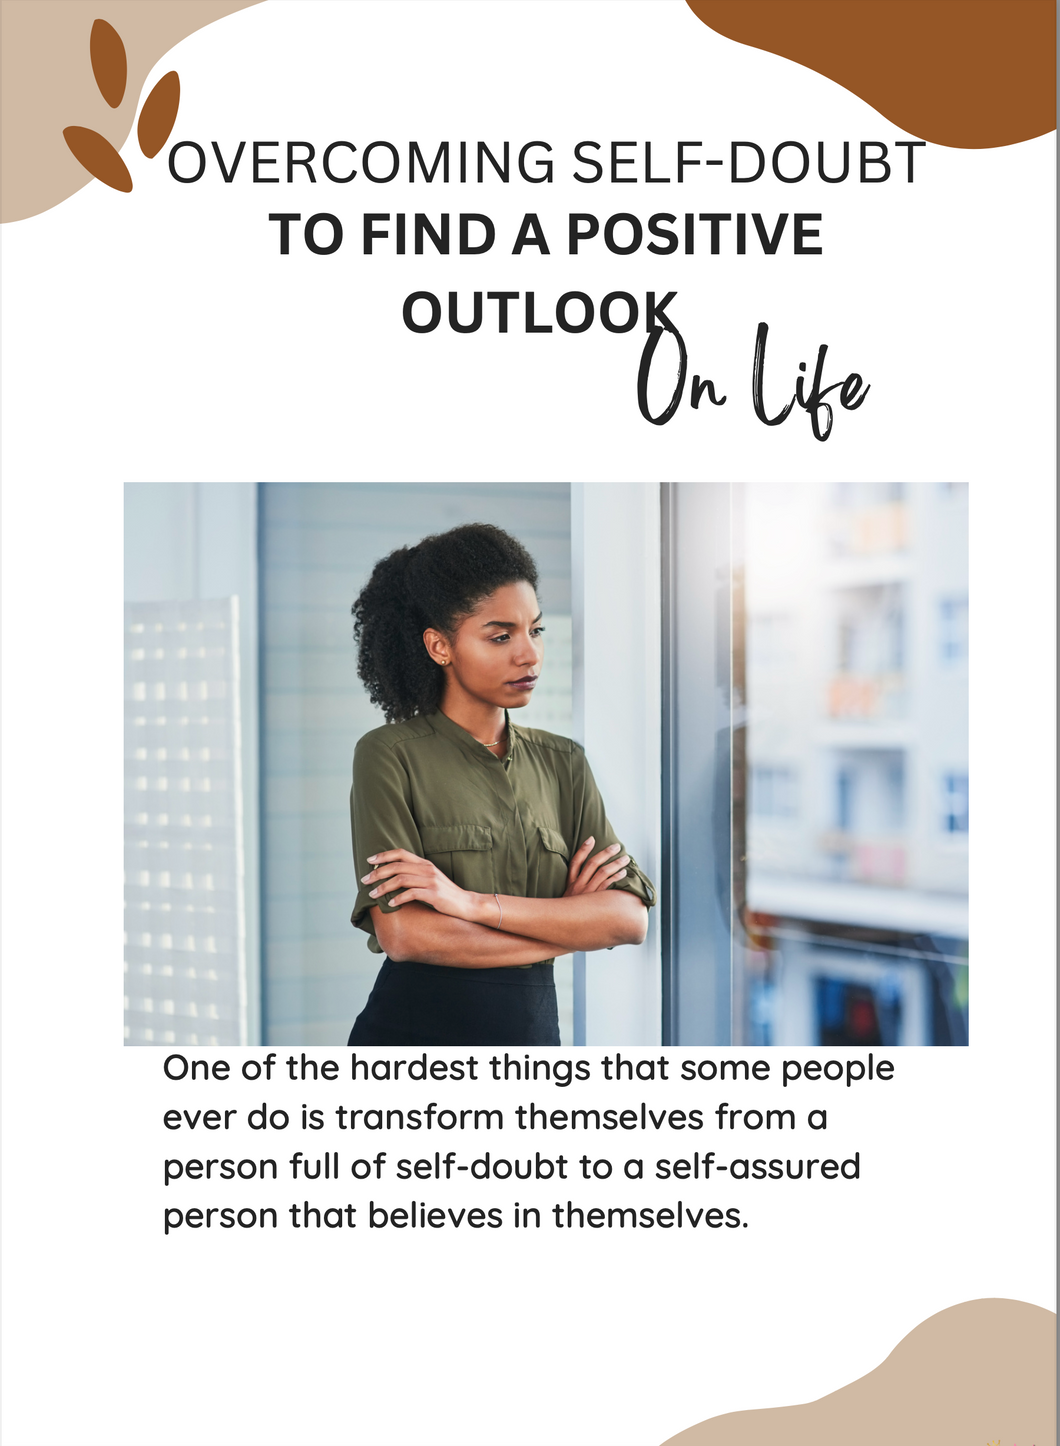 Overcoming Self-Doubt To Find A Positive Outlook On Life Mini-Ebook